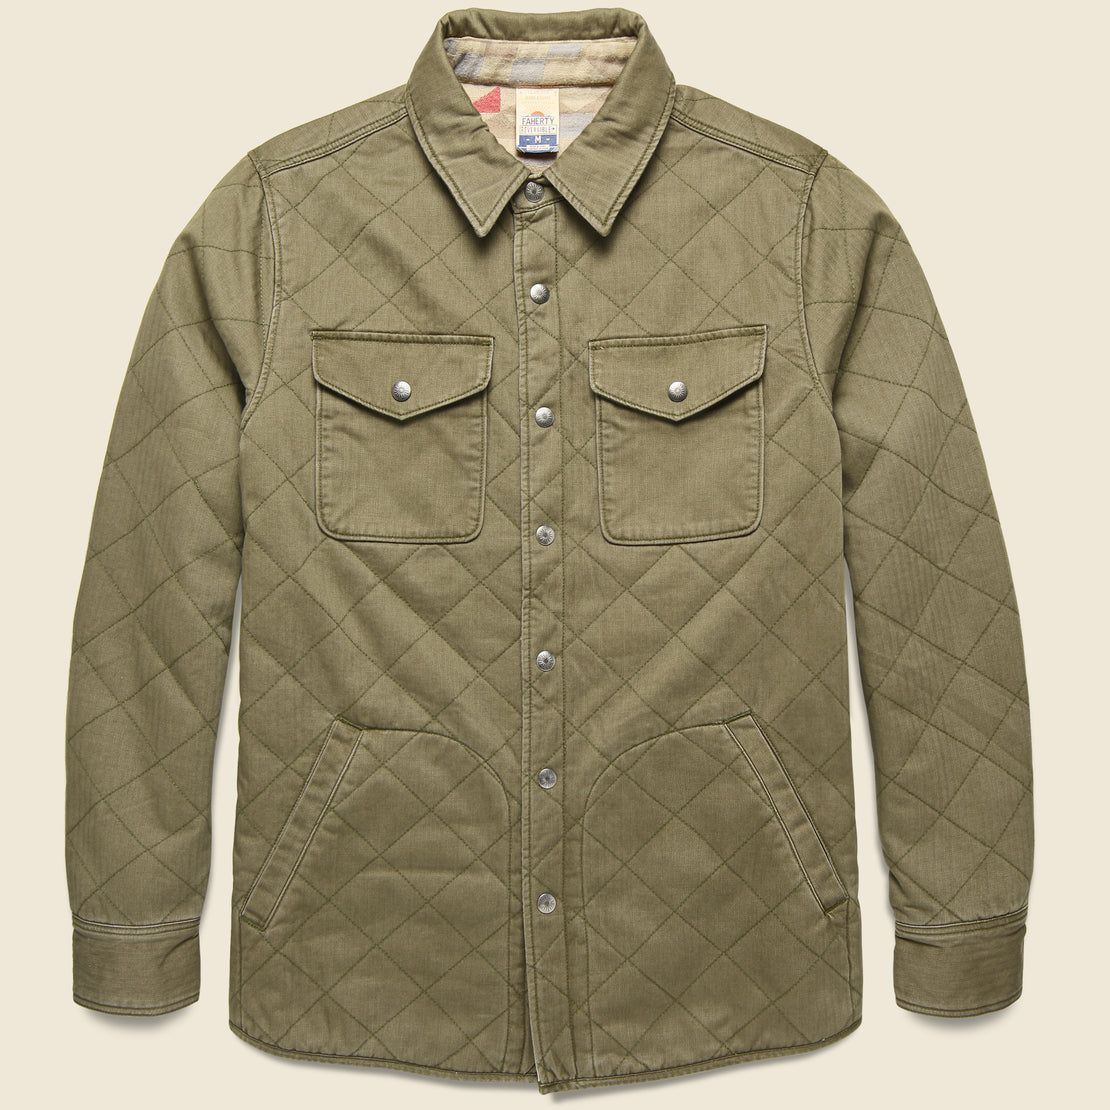 Yellowtail Reversible Bondi Jacket - Olive/Bighorn Sand - Faherty - STAG Provisions - Outerwear - Coat / Jacket